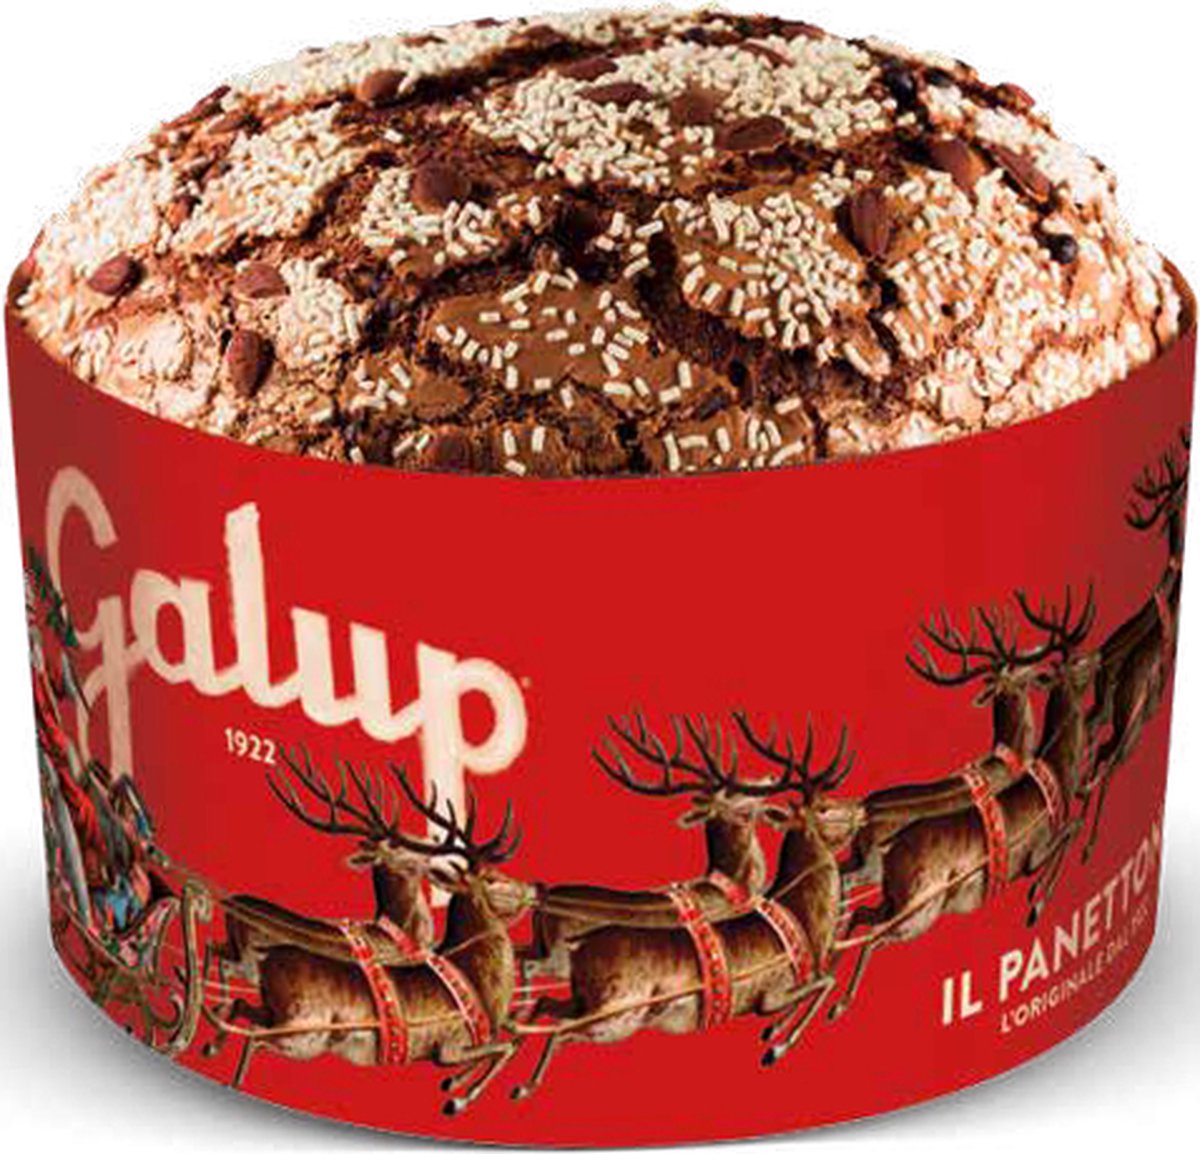 Natale Galup panettone GRAN GALUP PANETTONE TRADITIONEEL KINGSIZE - KERSTEDITIE 2Kg